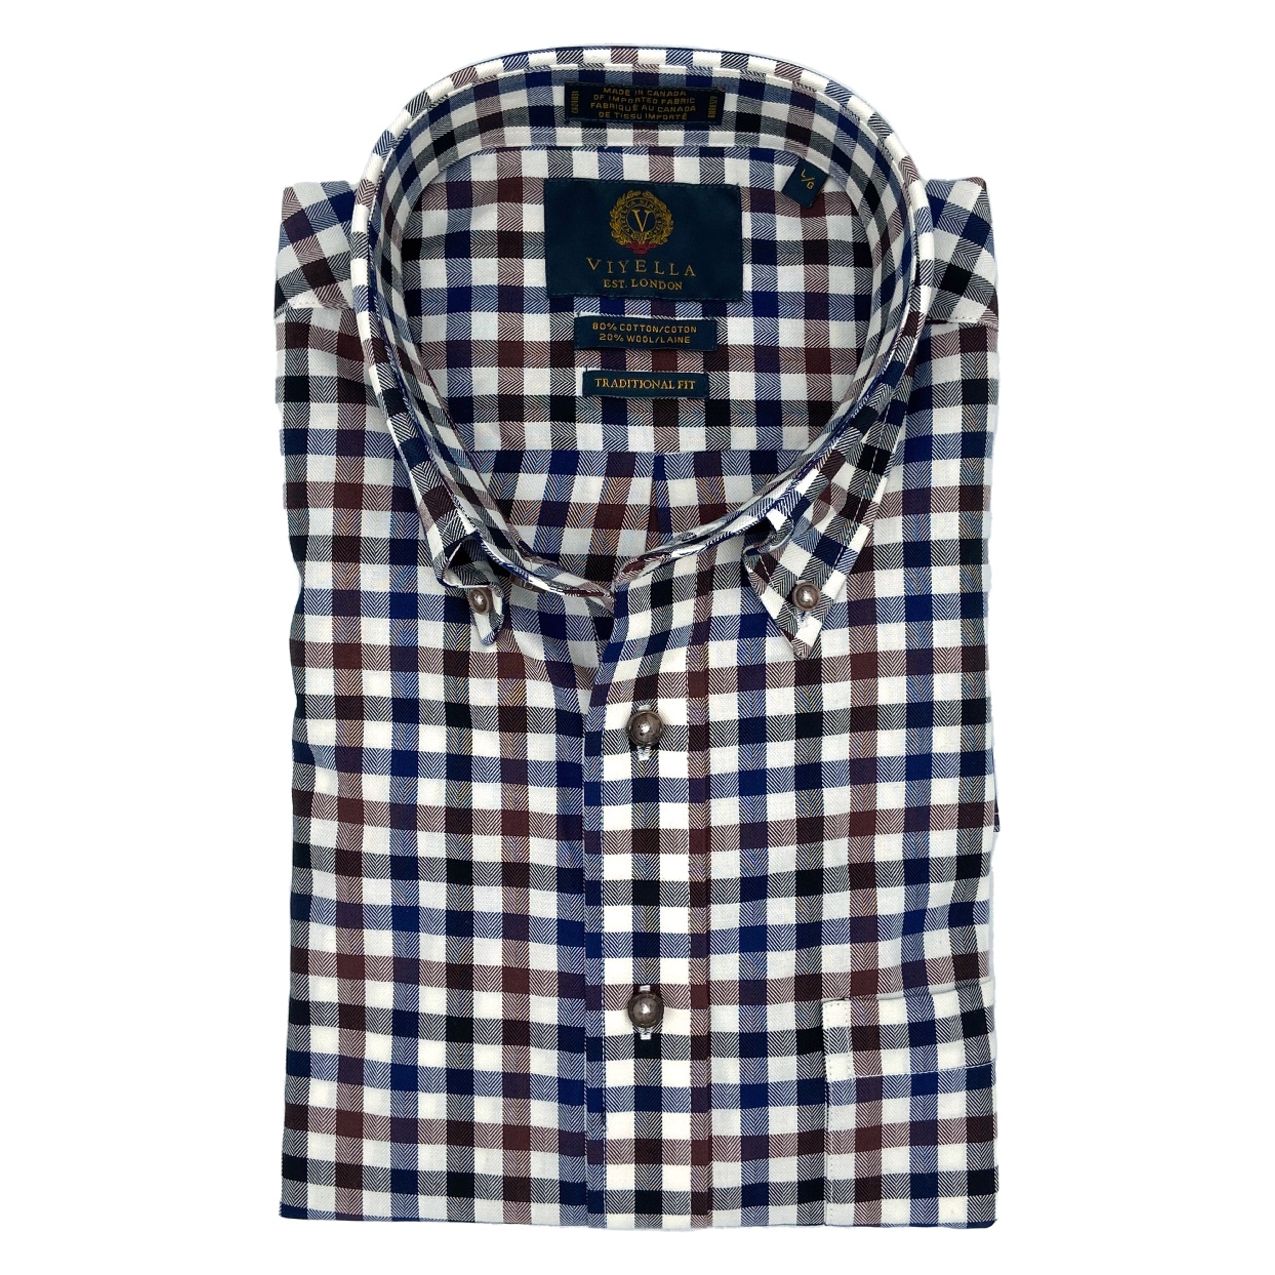 Brown, Blue, and Natural Herringbone Check Cotton and Wool Blend Button-Down Shirt by Viyella